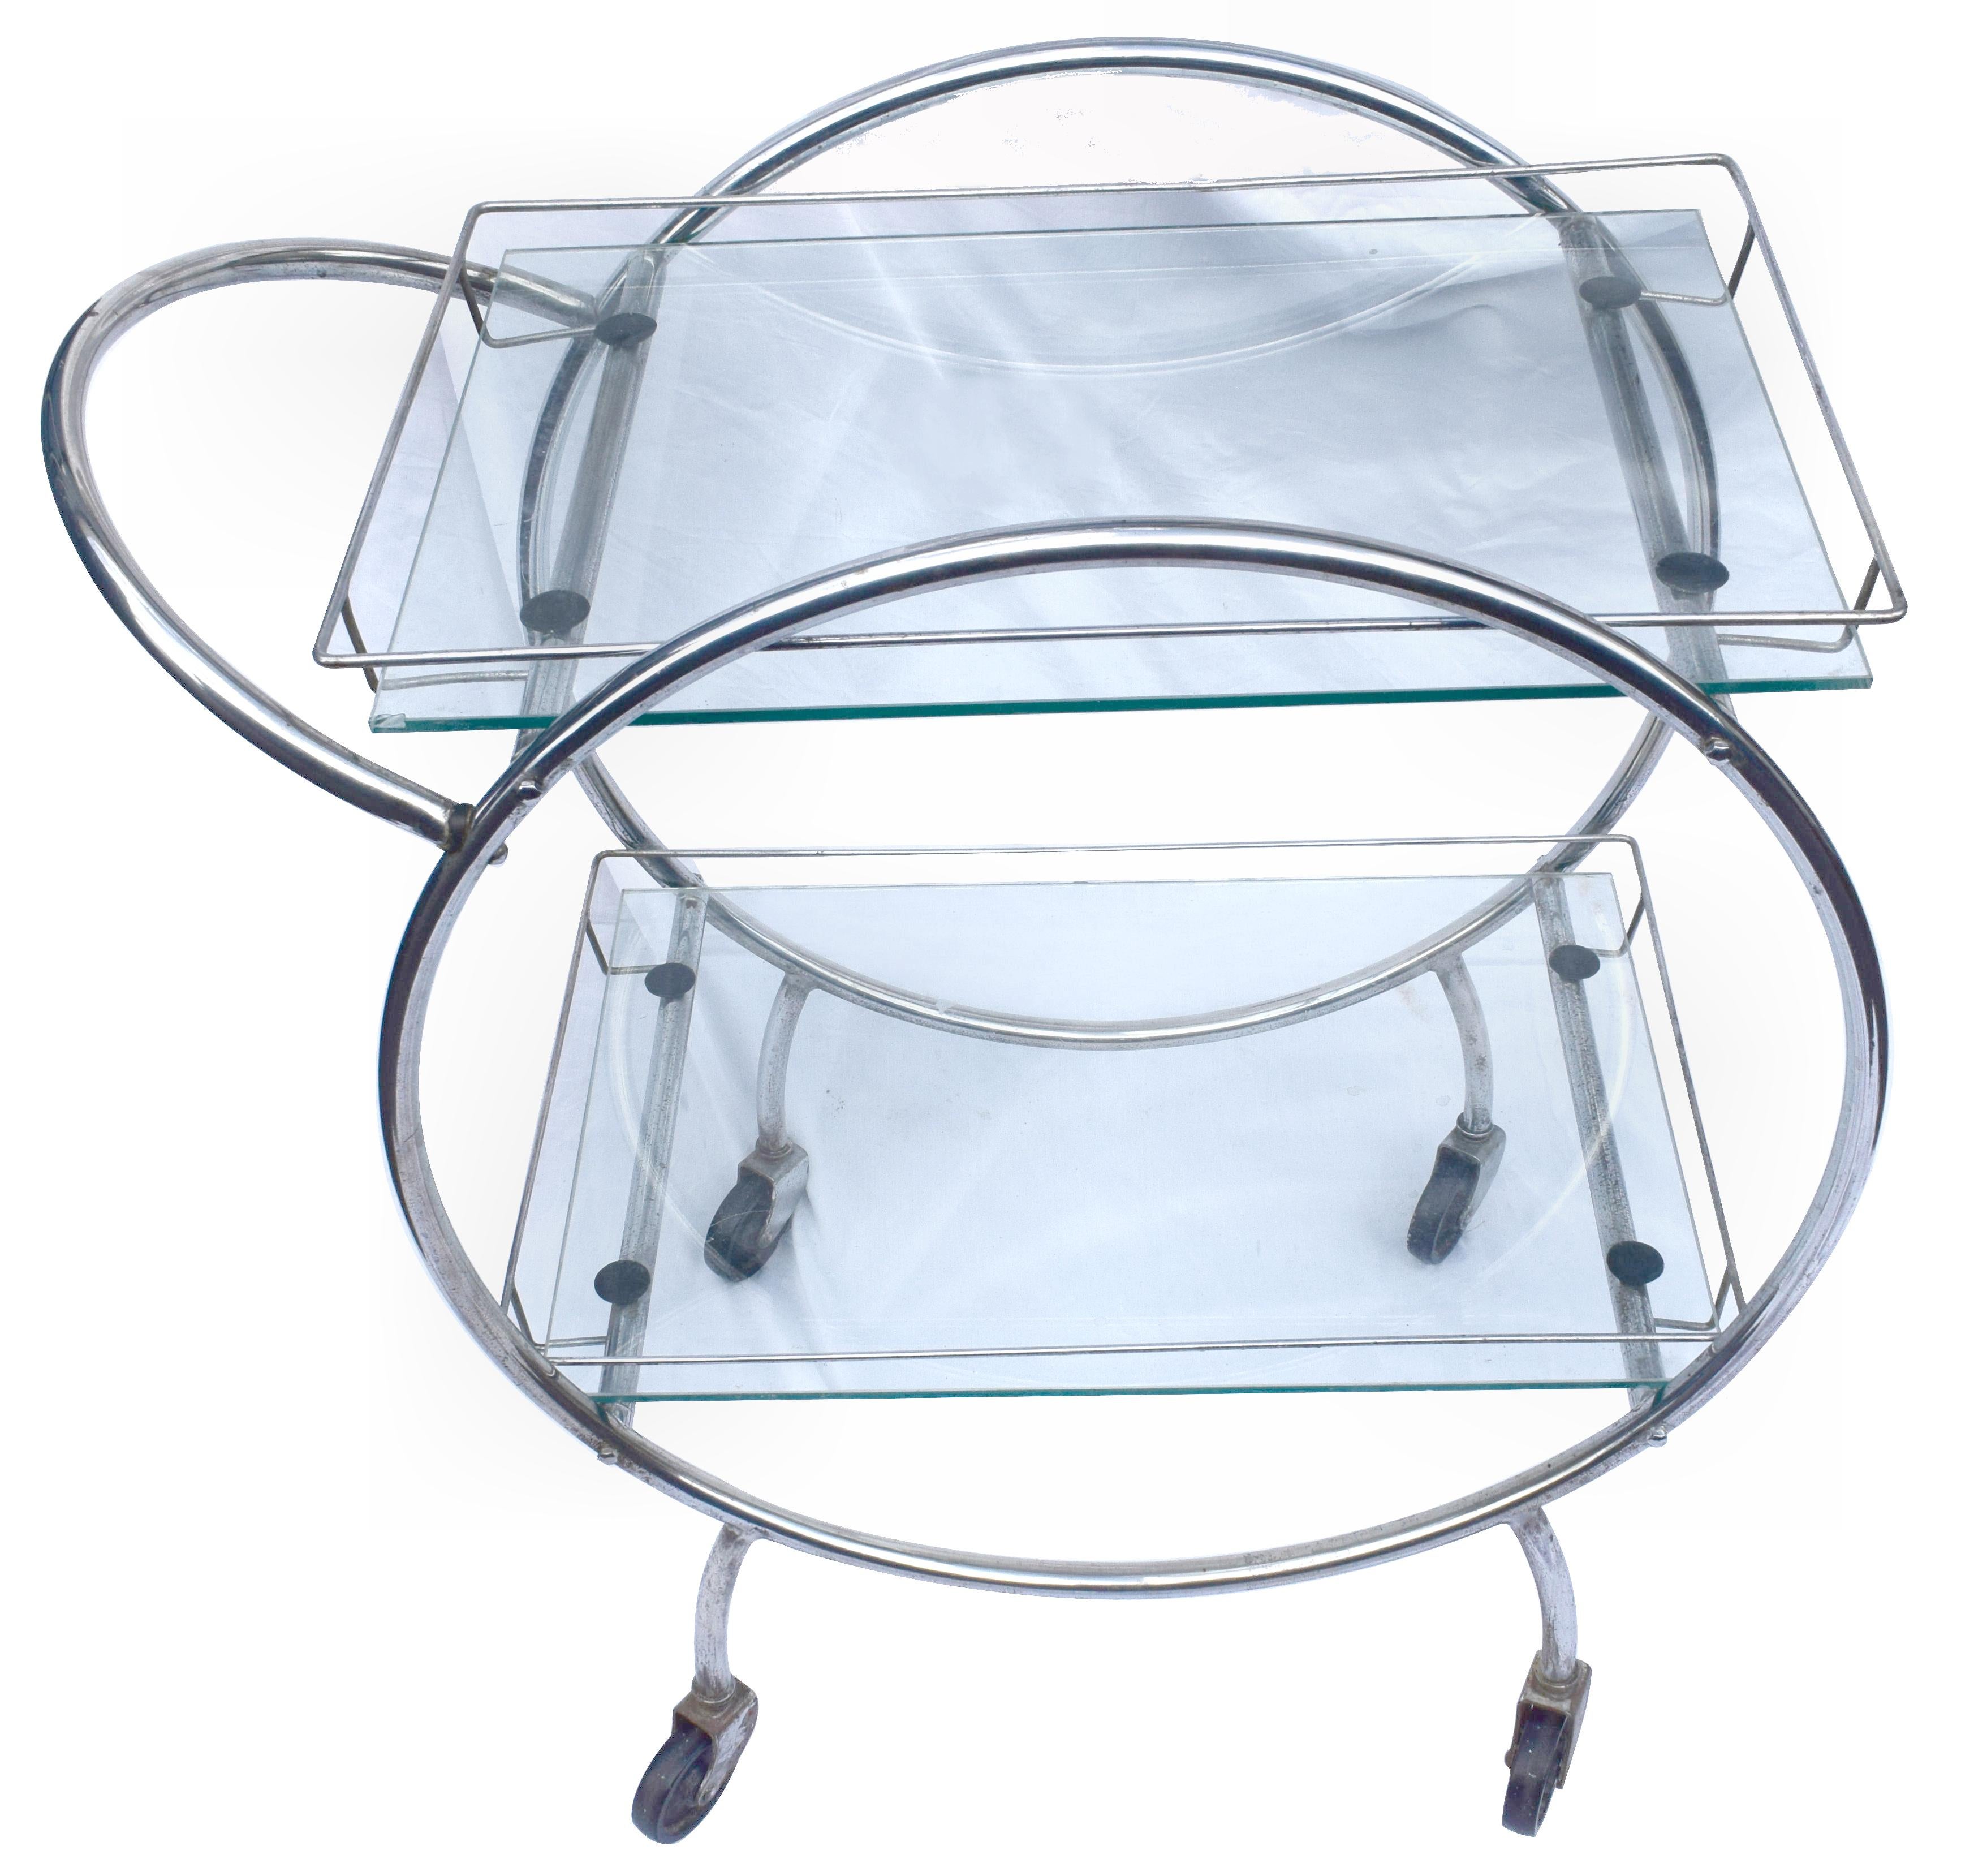 Stylish English two-tier Art Deco chrome and glass drinks Hostess trolley bar cart. Dating to the 1930s and if glam is your thing then this is for you! In situ these carts look nothing less than superb. Can be used for serving or just displaying